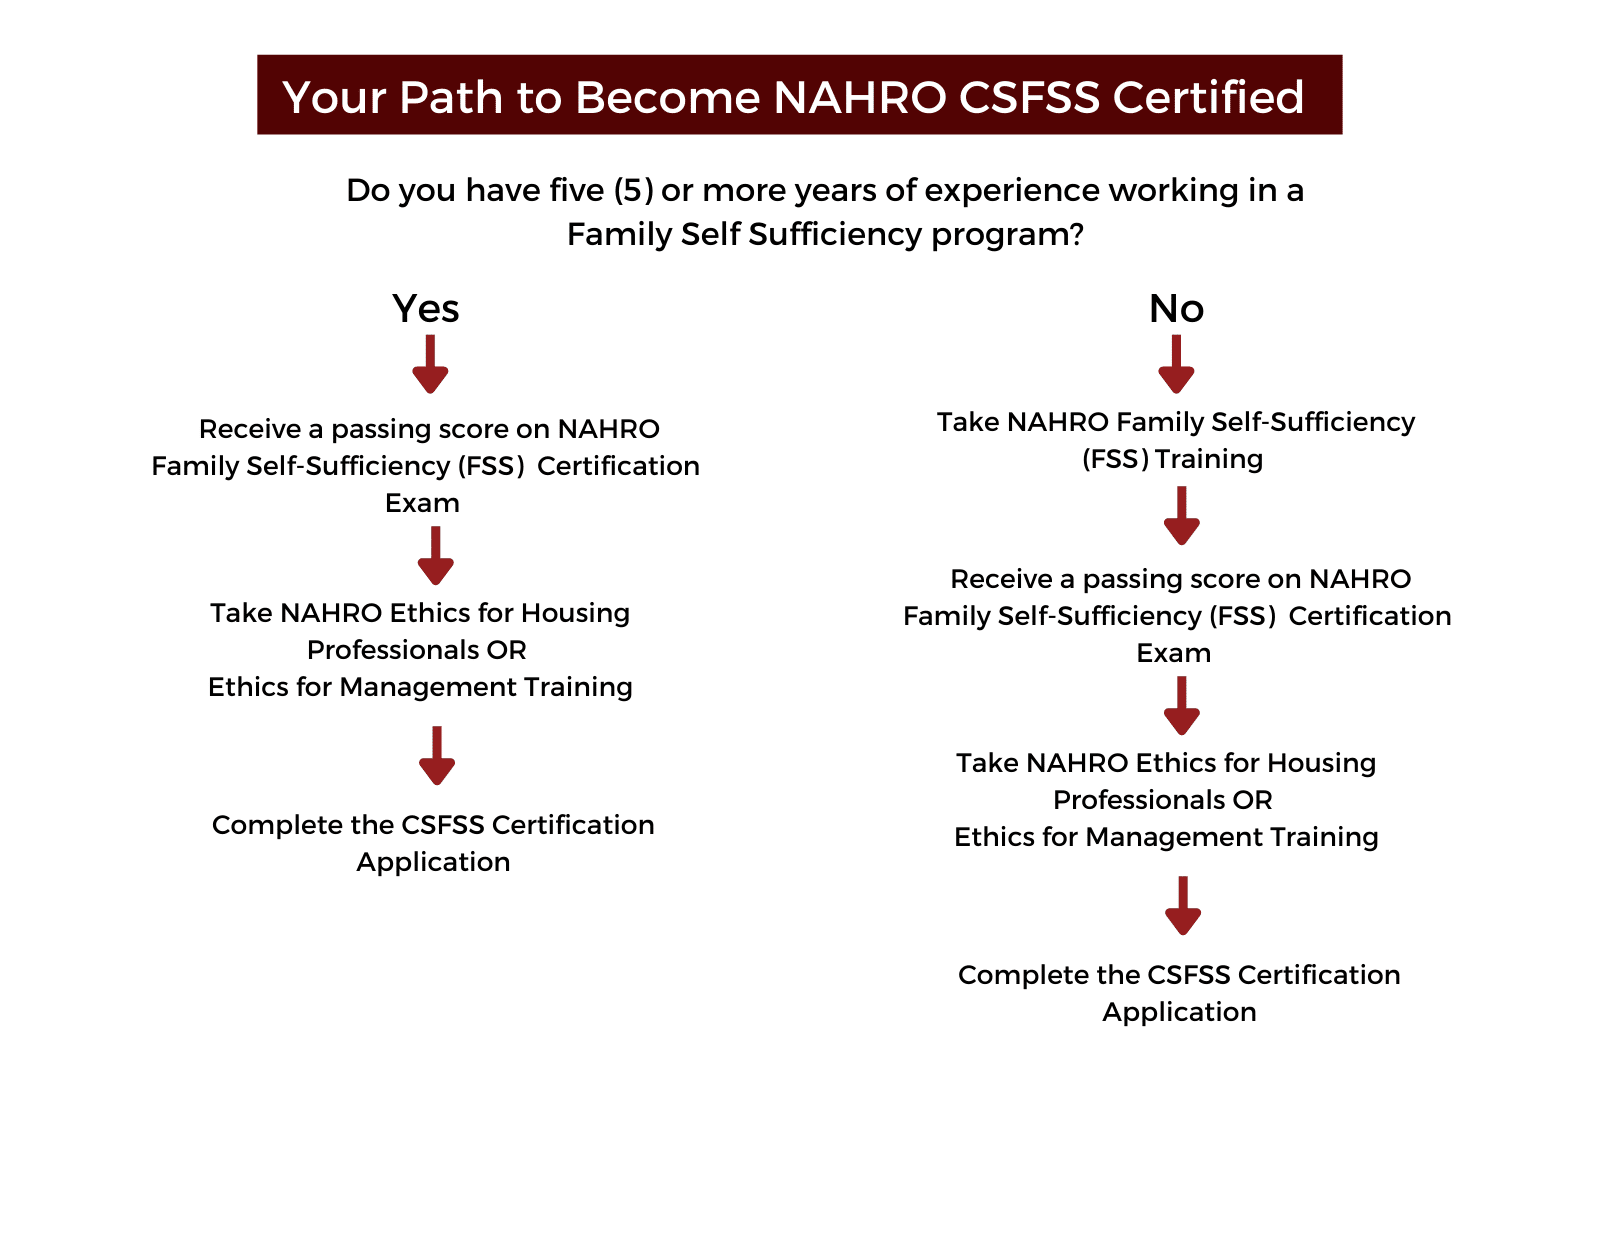 Your Path to Become NAHRO Certified Specialist of Family Self Sufficiency (CSFSS) Flow Chart  There are two paths to become NAHRO CSFSS Certified.  Path 1: If you do not have five or more years of experience working in a Family Self Sufficiency program, you are required to take the NAHRO Family Self Sufficiency (FSS) Training. This path also requires you to receive a passing score on the NAHRO Family Self Sufficiency (FSS) Certification Exam, Take NAHRO Ethics for Housing Professionals OR Ethics for Management Training, and Complete the CSFSS Certification Application.  Path 2: If you have five or more years of experience working in a Family Self Sufficiency program, you may forgo the NAHRO Family Self Sufficiency (FSS) Training. This path still requires you to receive a passing score on the NAHRO Family Self Sufficiency (FSS) Certification Exam, Take NAHRO Ethics for Housing Professionals OR Ethics for Management Training, and Complete the CSFSS Certification Application.